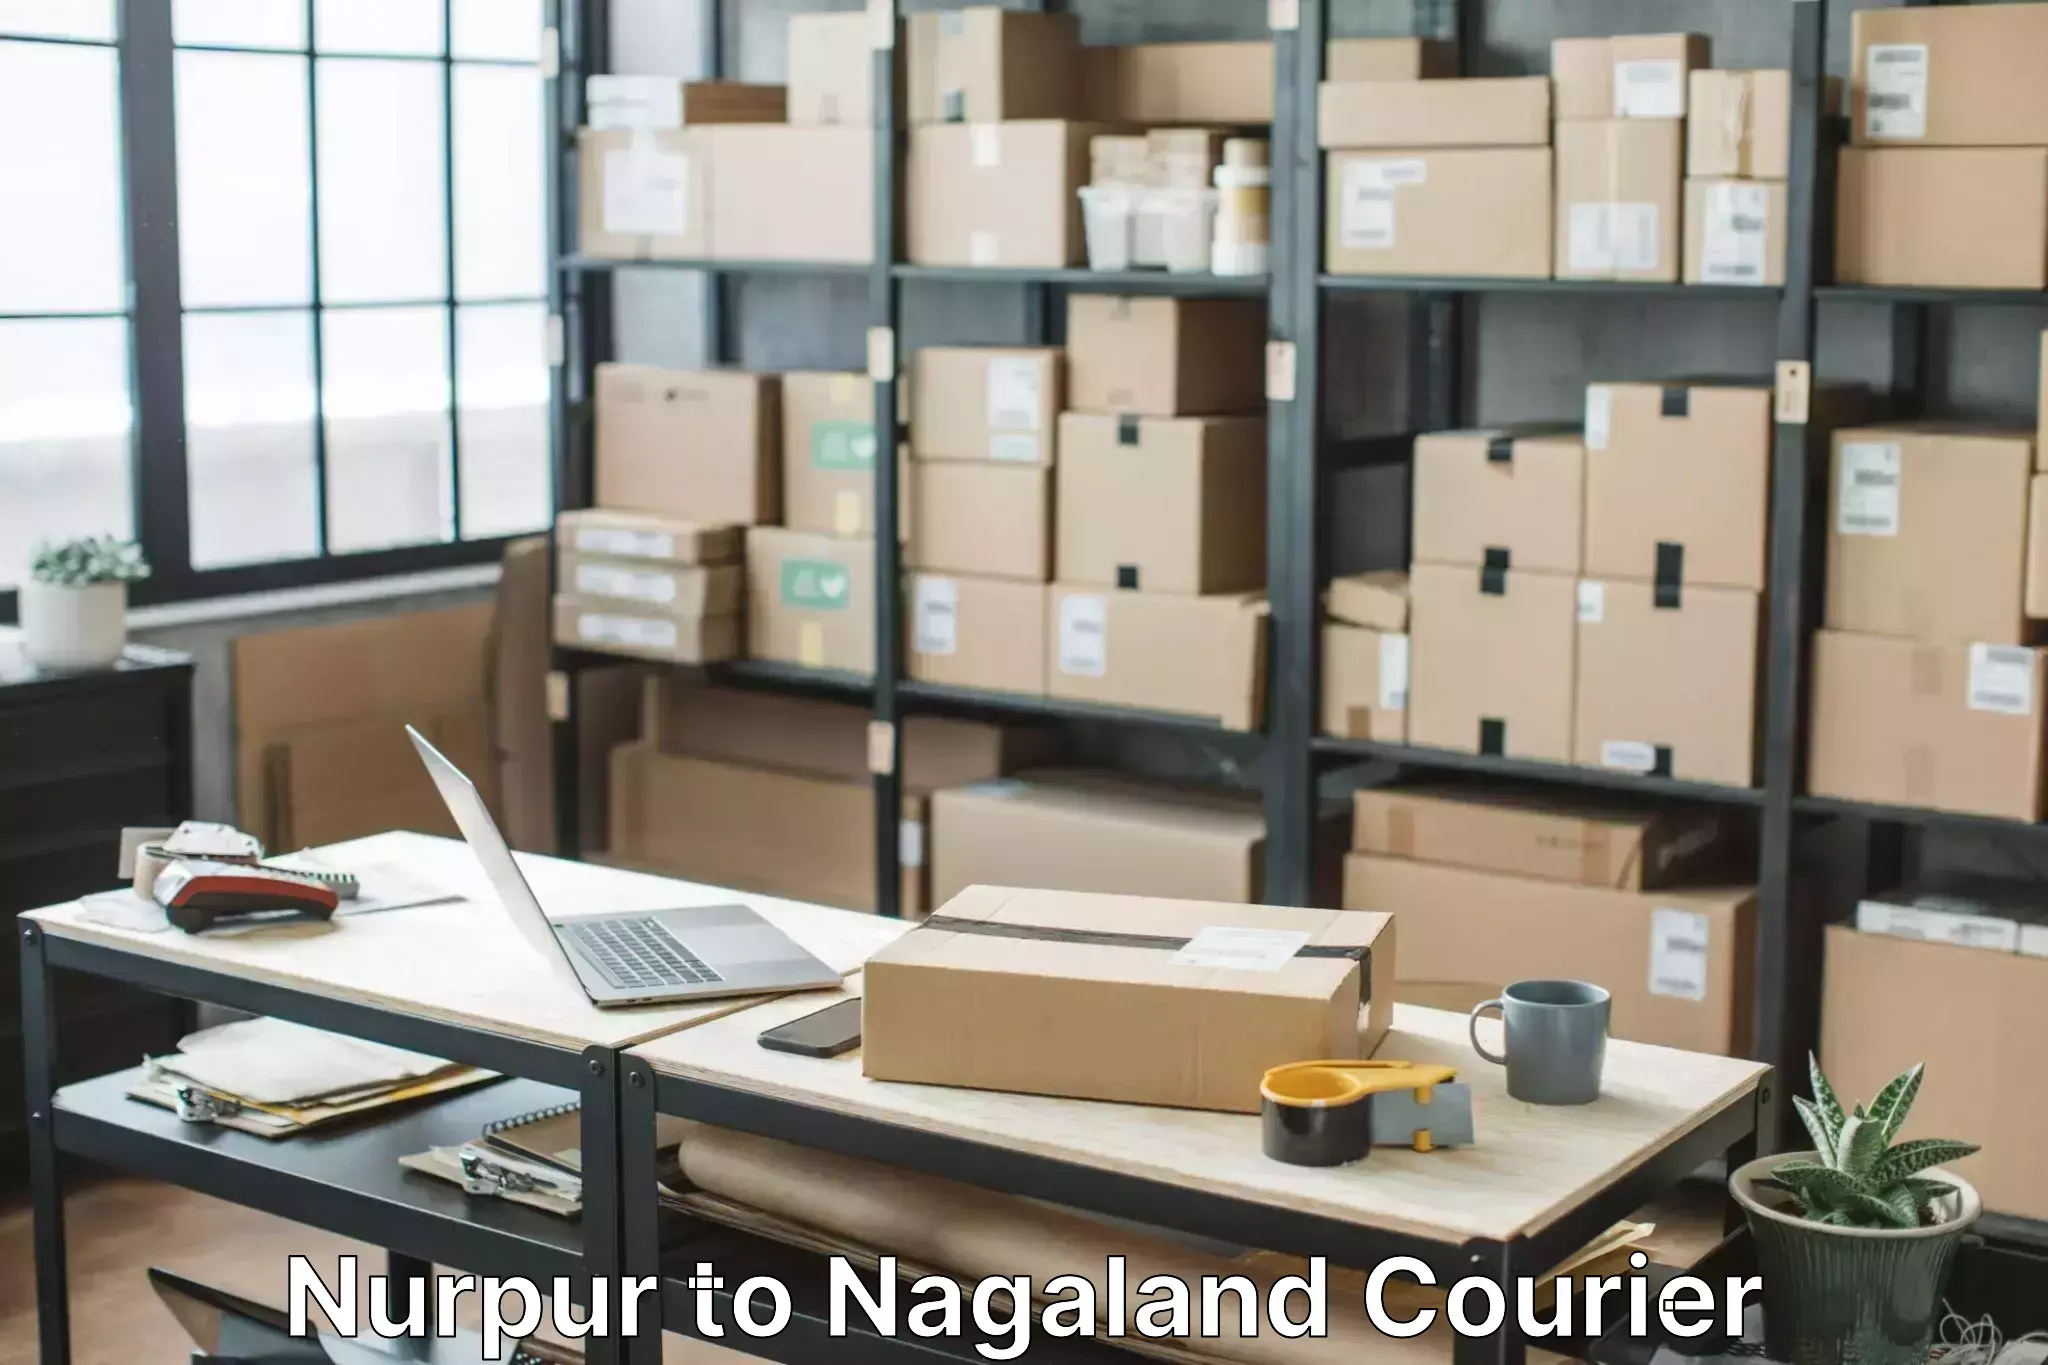 Cost-effective moving solutions Nurpur to Nagaland